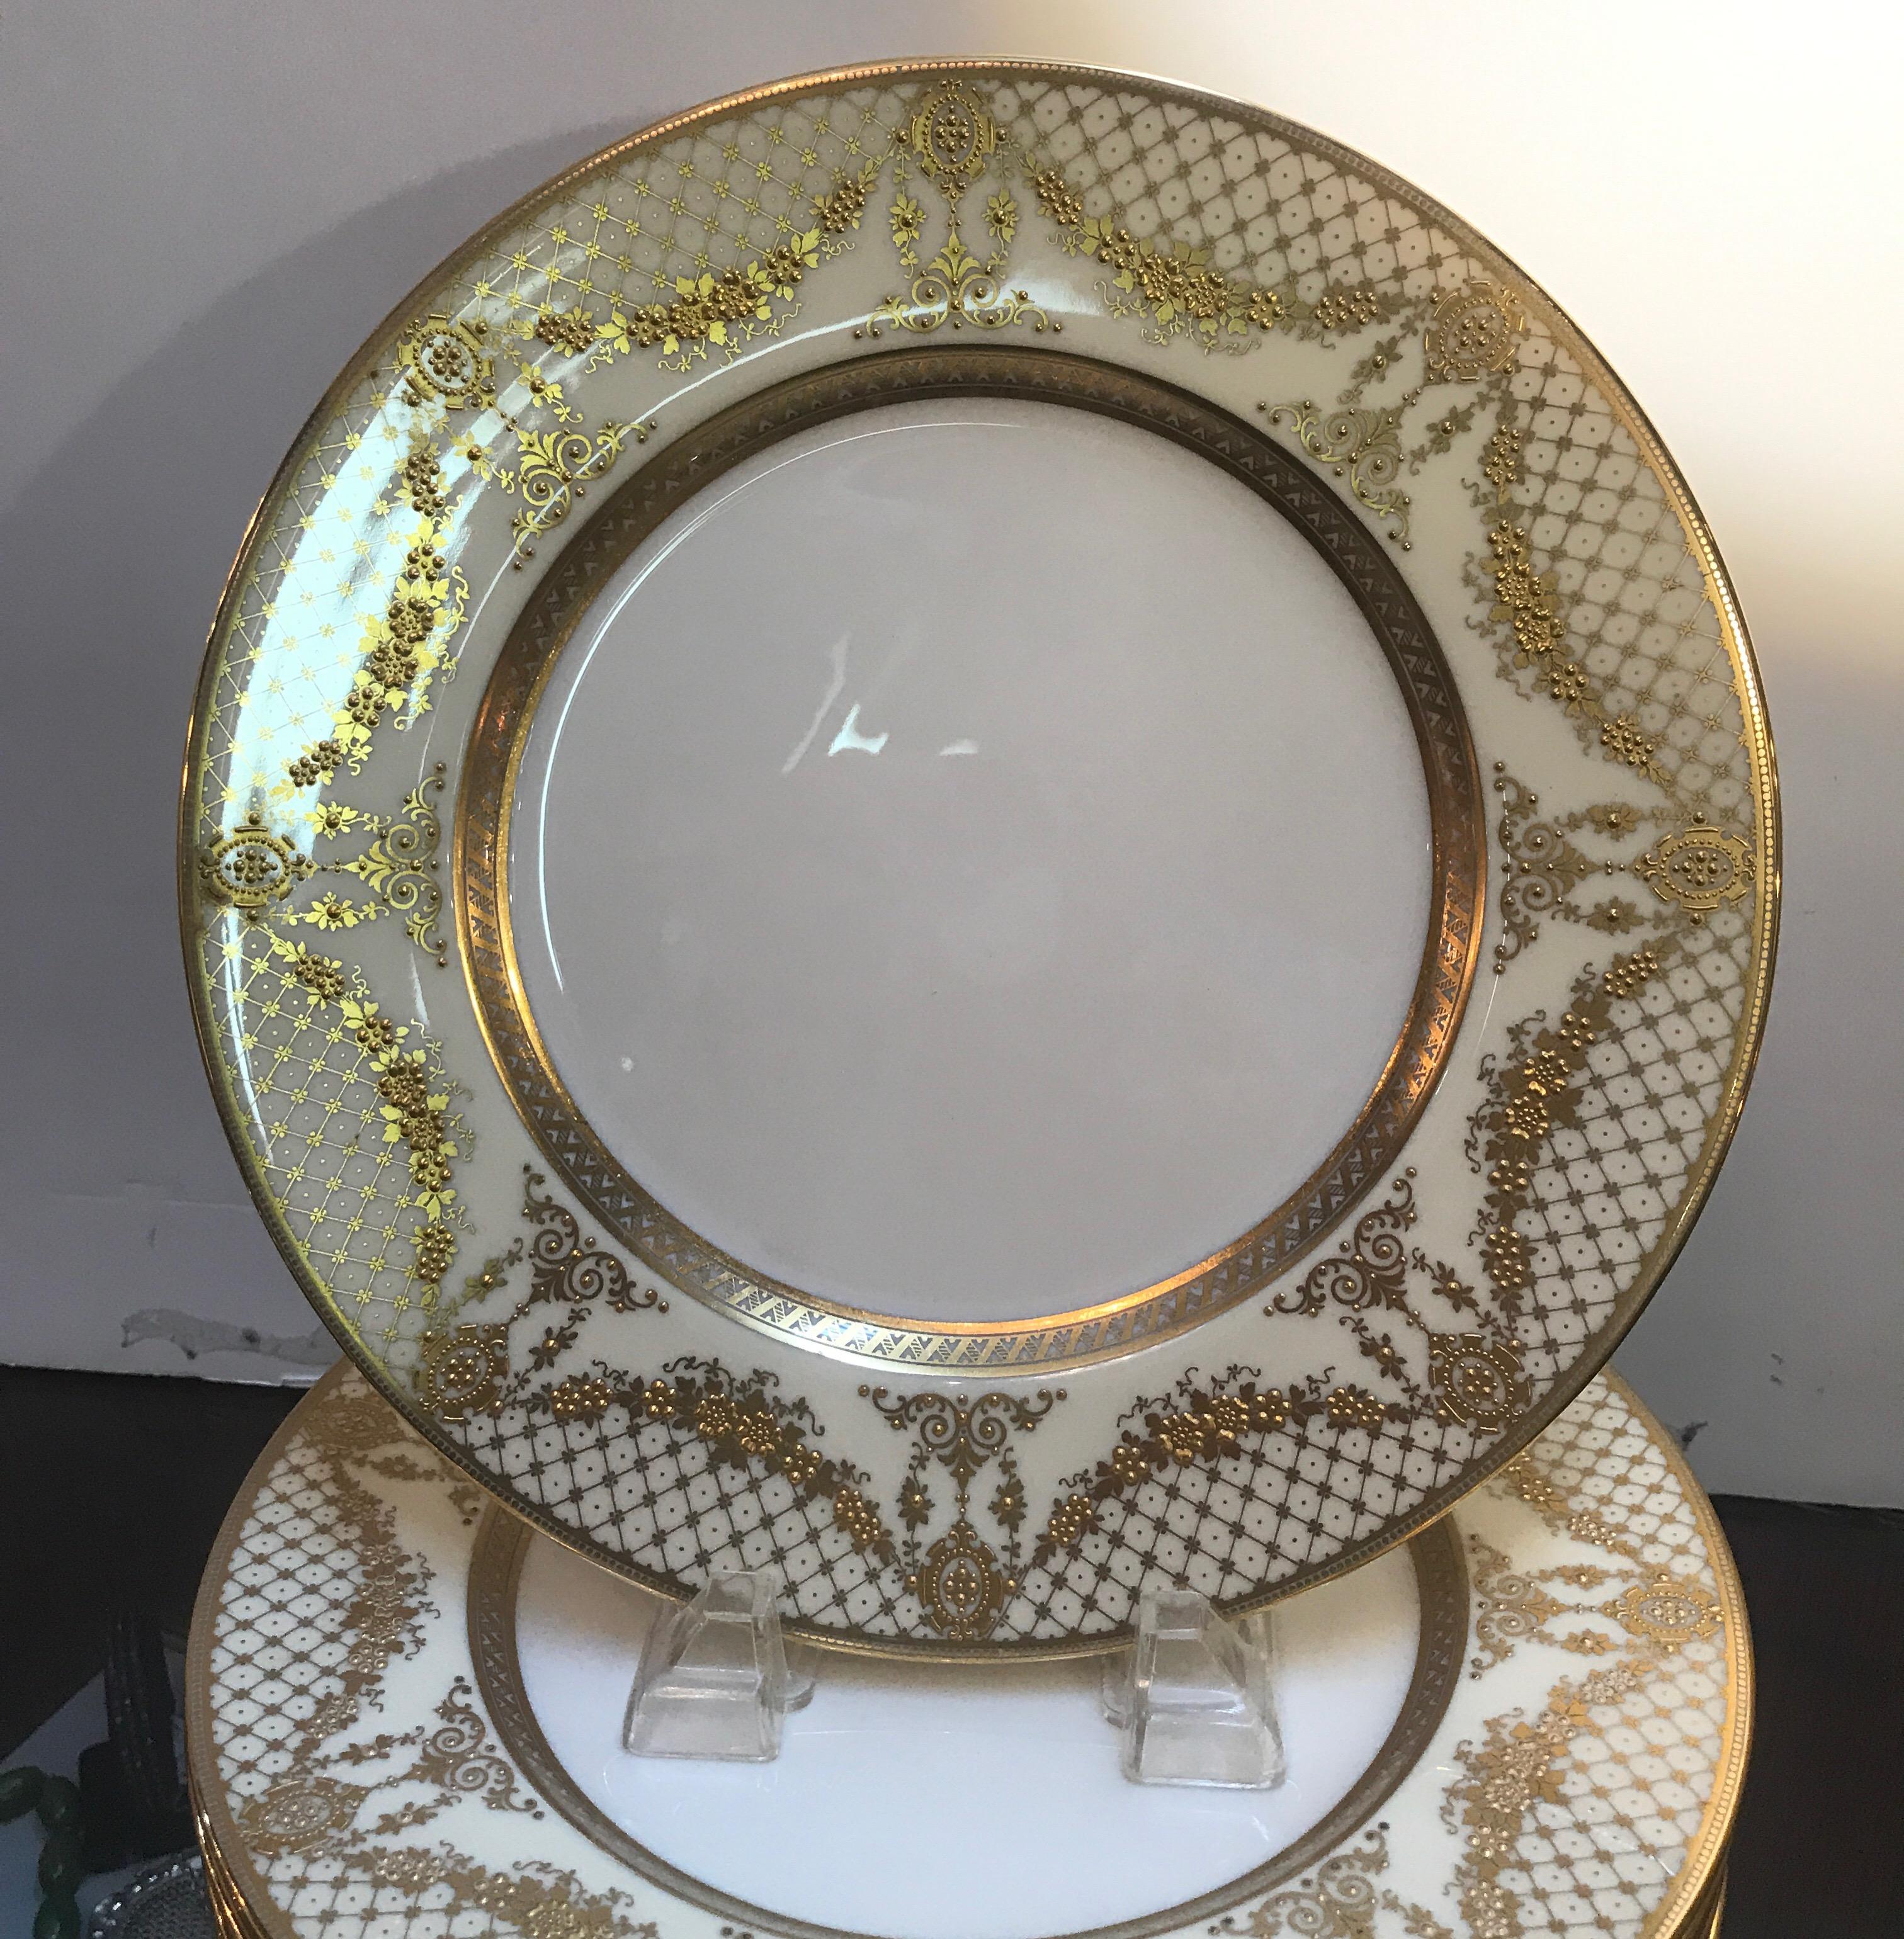 Elegant and graceful gilt service dinner plates with stunning gold encrusted border. The set was a custom pattern and in a lavish gold with slightly off white background. These plates will compliment almost any formal pattern in any color. The back